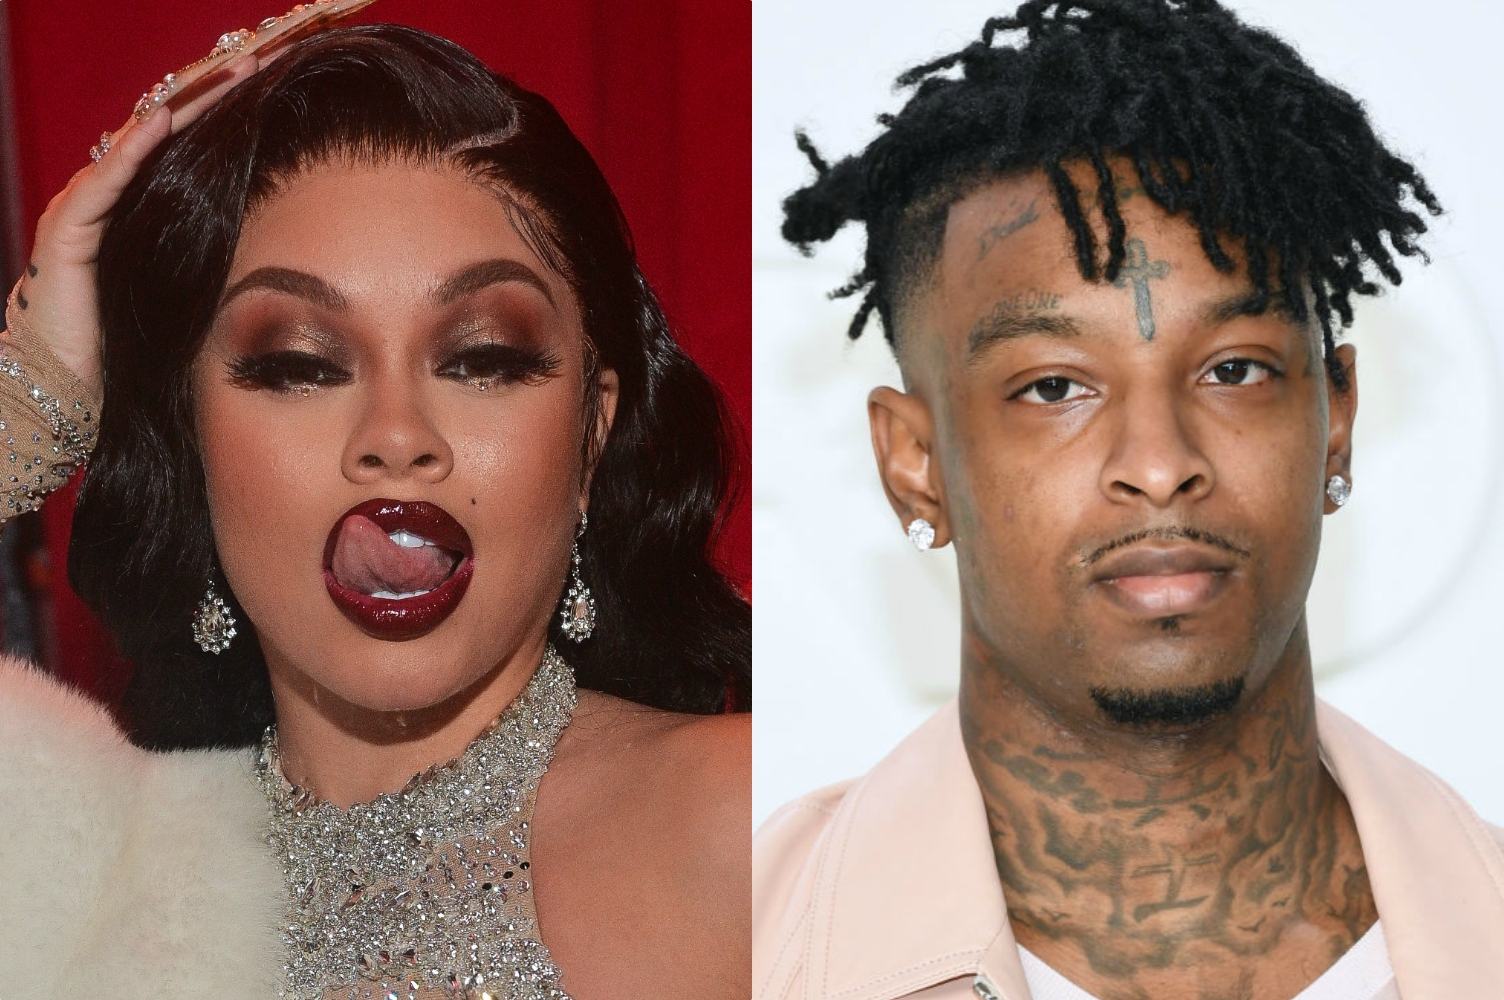 21 Savage's Wife Reportedly Divorcing Him Due to Alleged Latto Affair